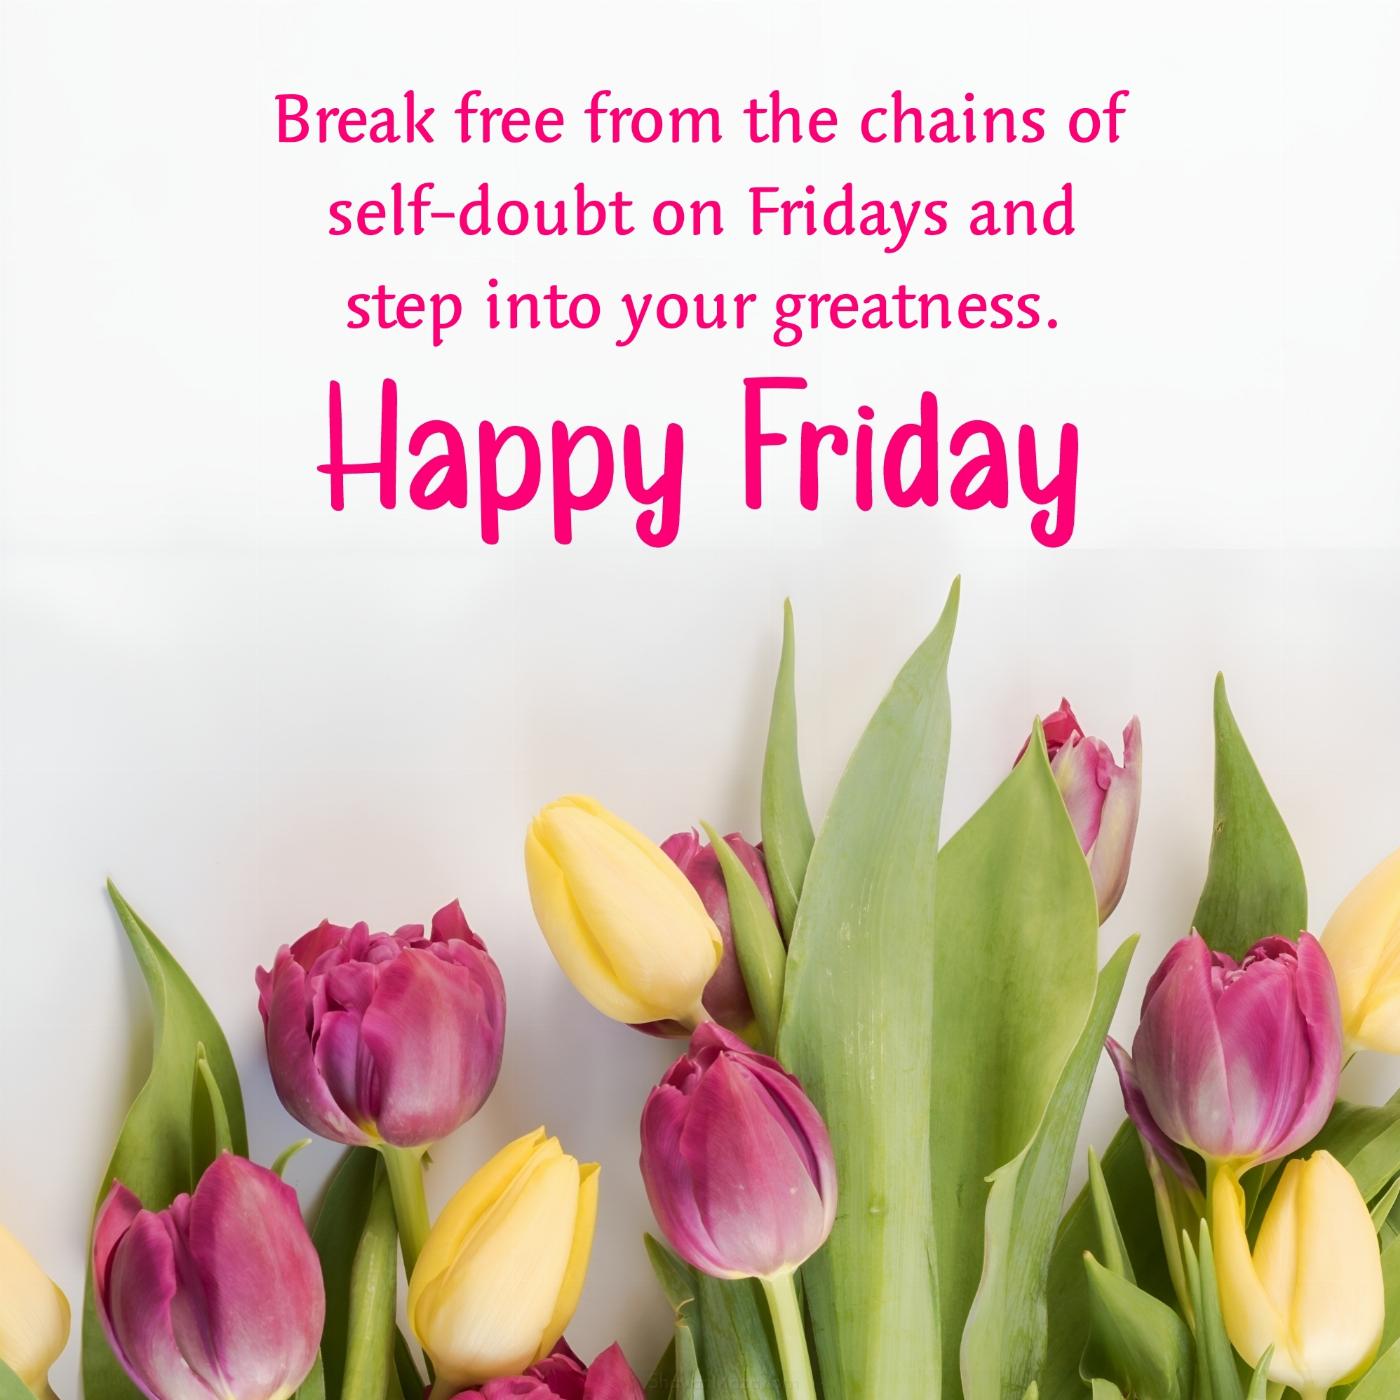 Break free from the chains of self-doubt on Fridays and step into your greatness